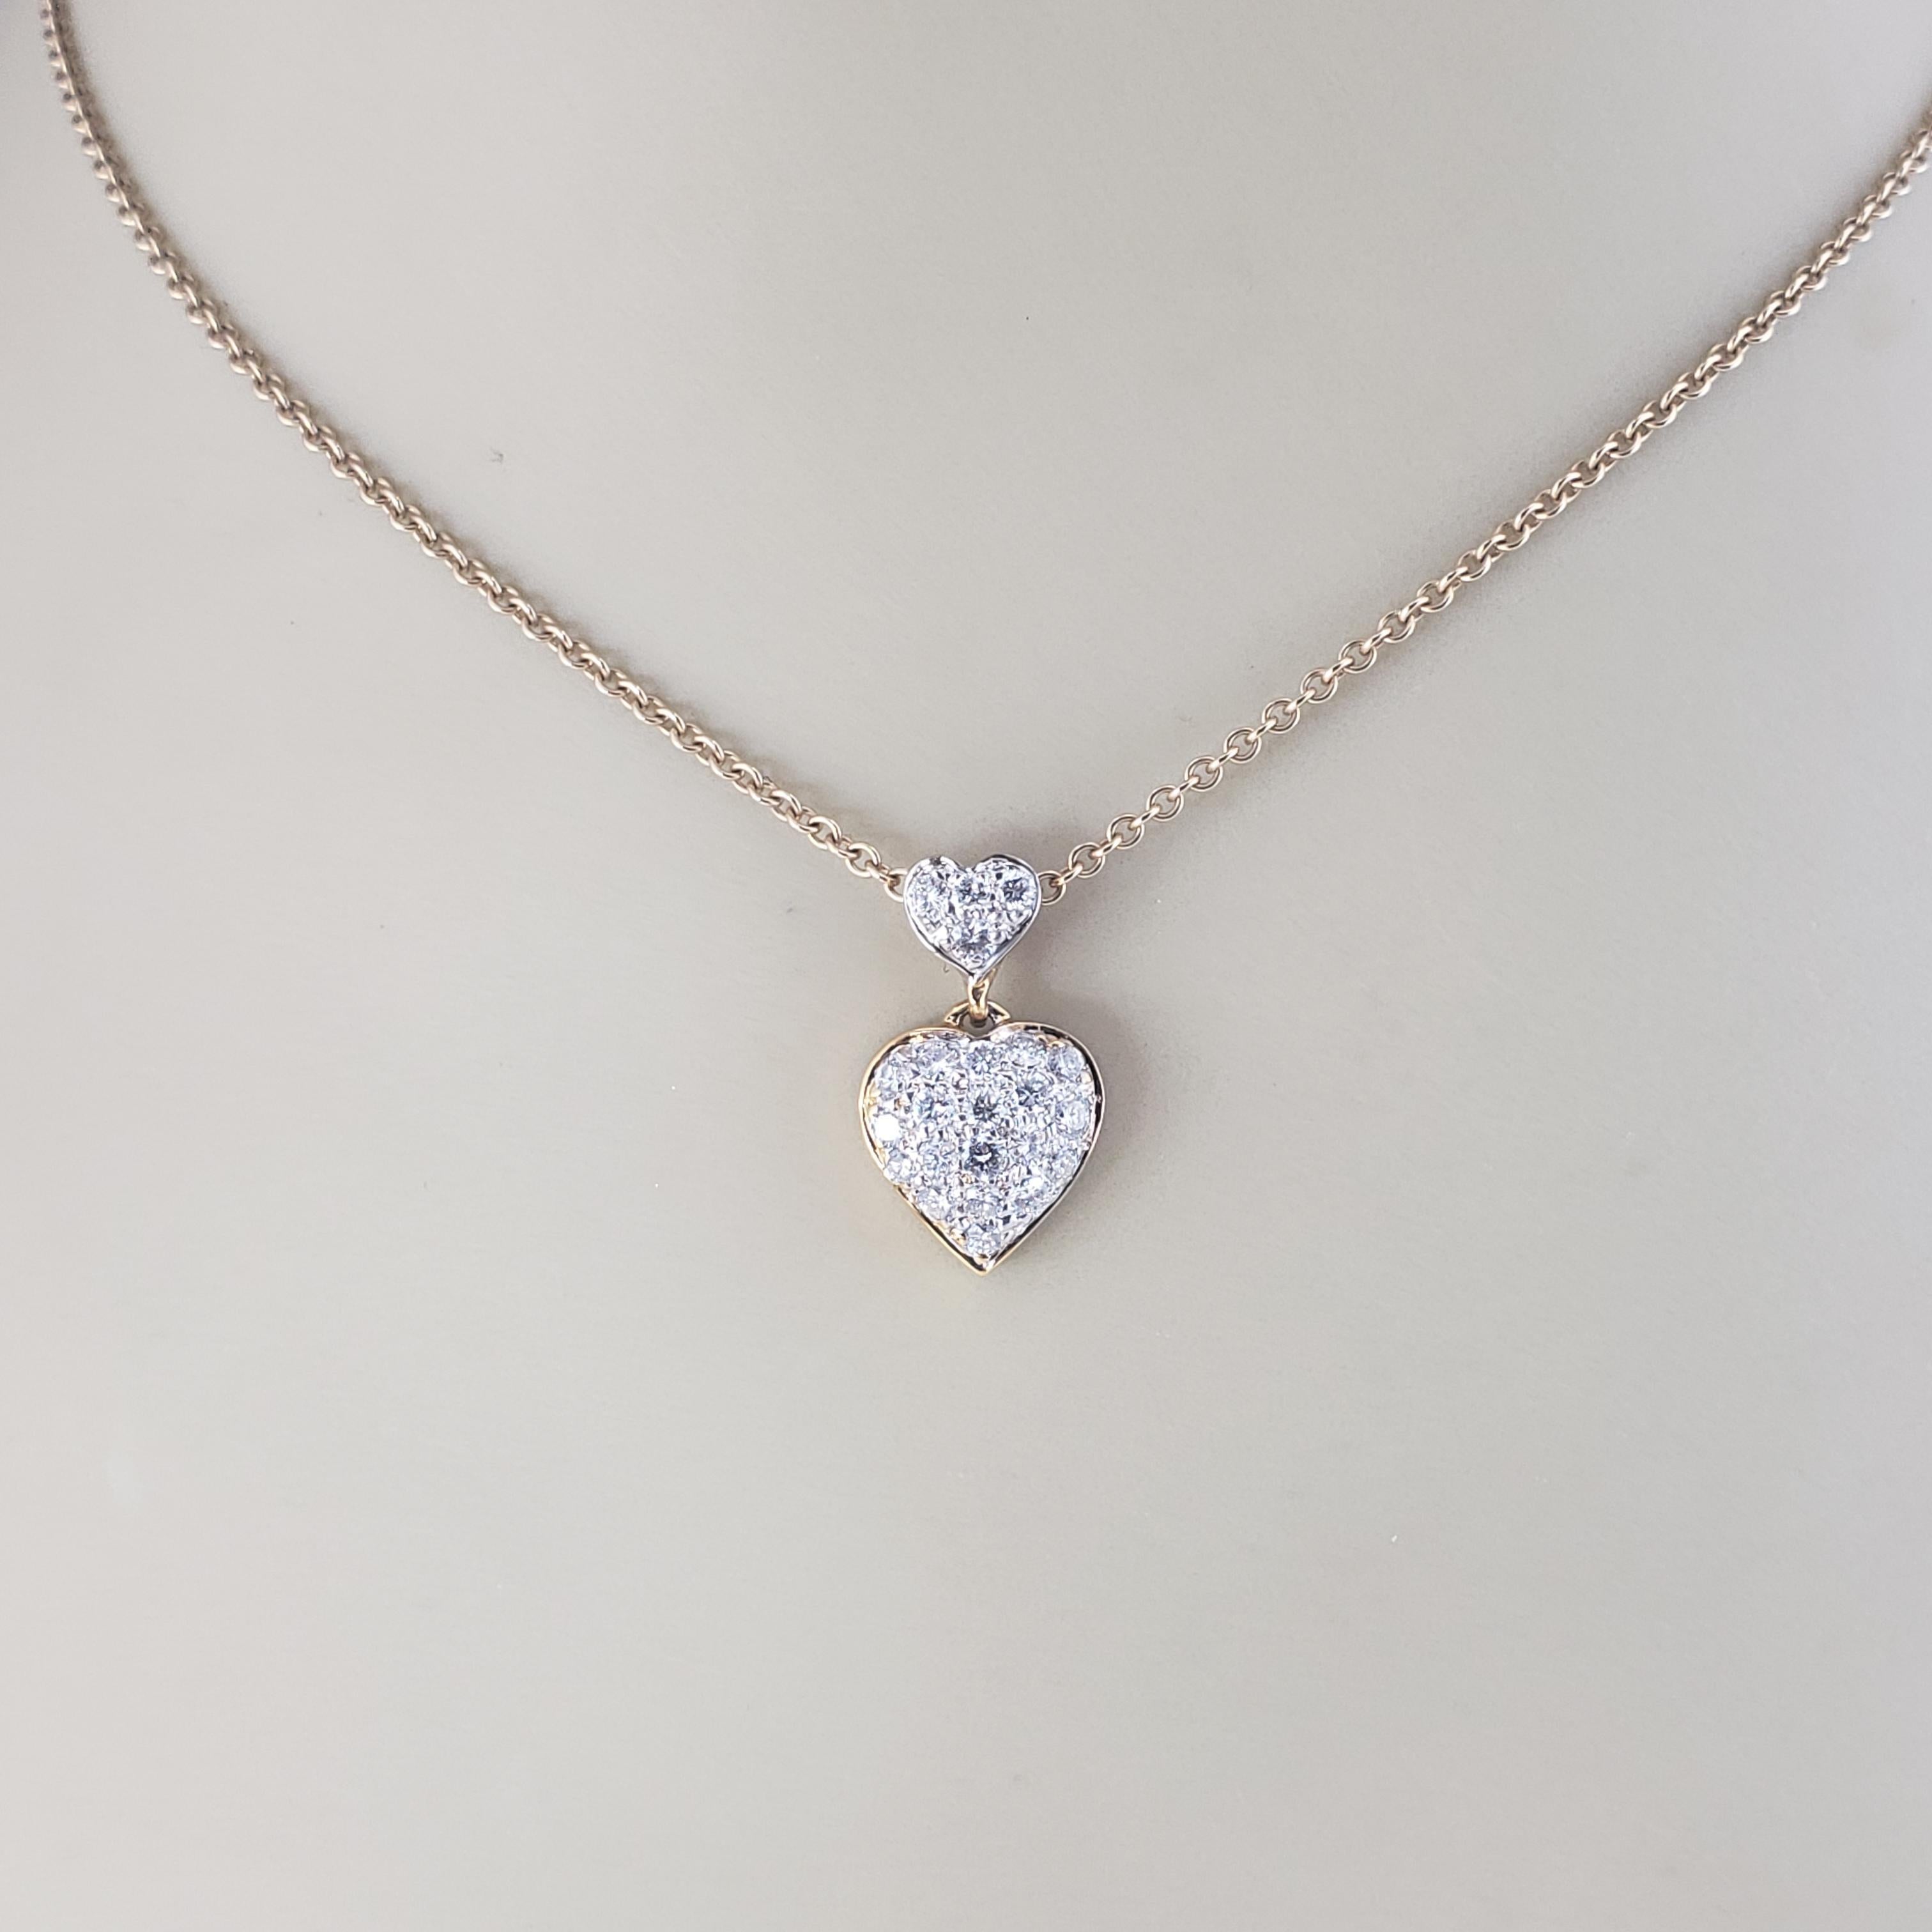 14 Karat Yellow Gold and Diamond Heart Pendant

This sparkling heart pendant features 23 round brilliant cut diamonds set in beautifully detailed 14K yellow gold.

Approximate total diamond weight: .65 ct.

Diamond color: G-I

Diamond clarity: